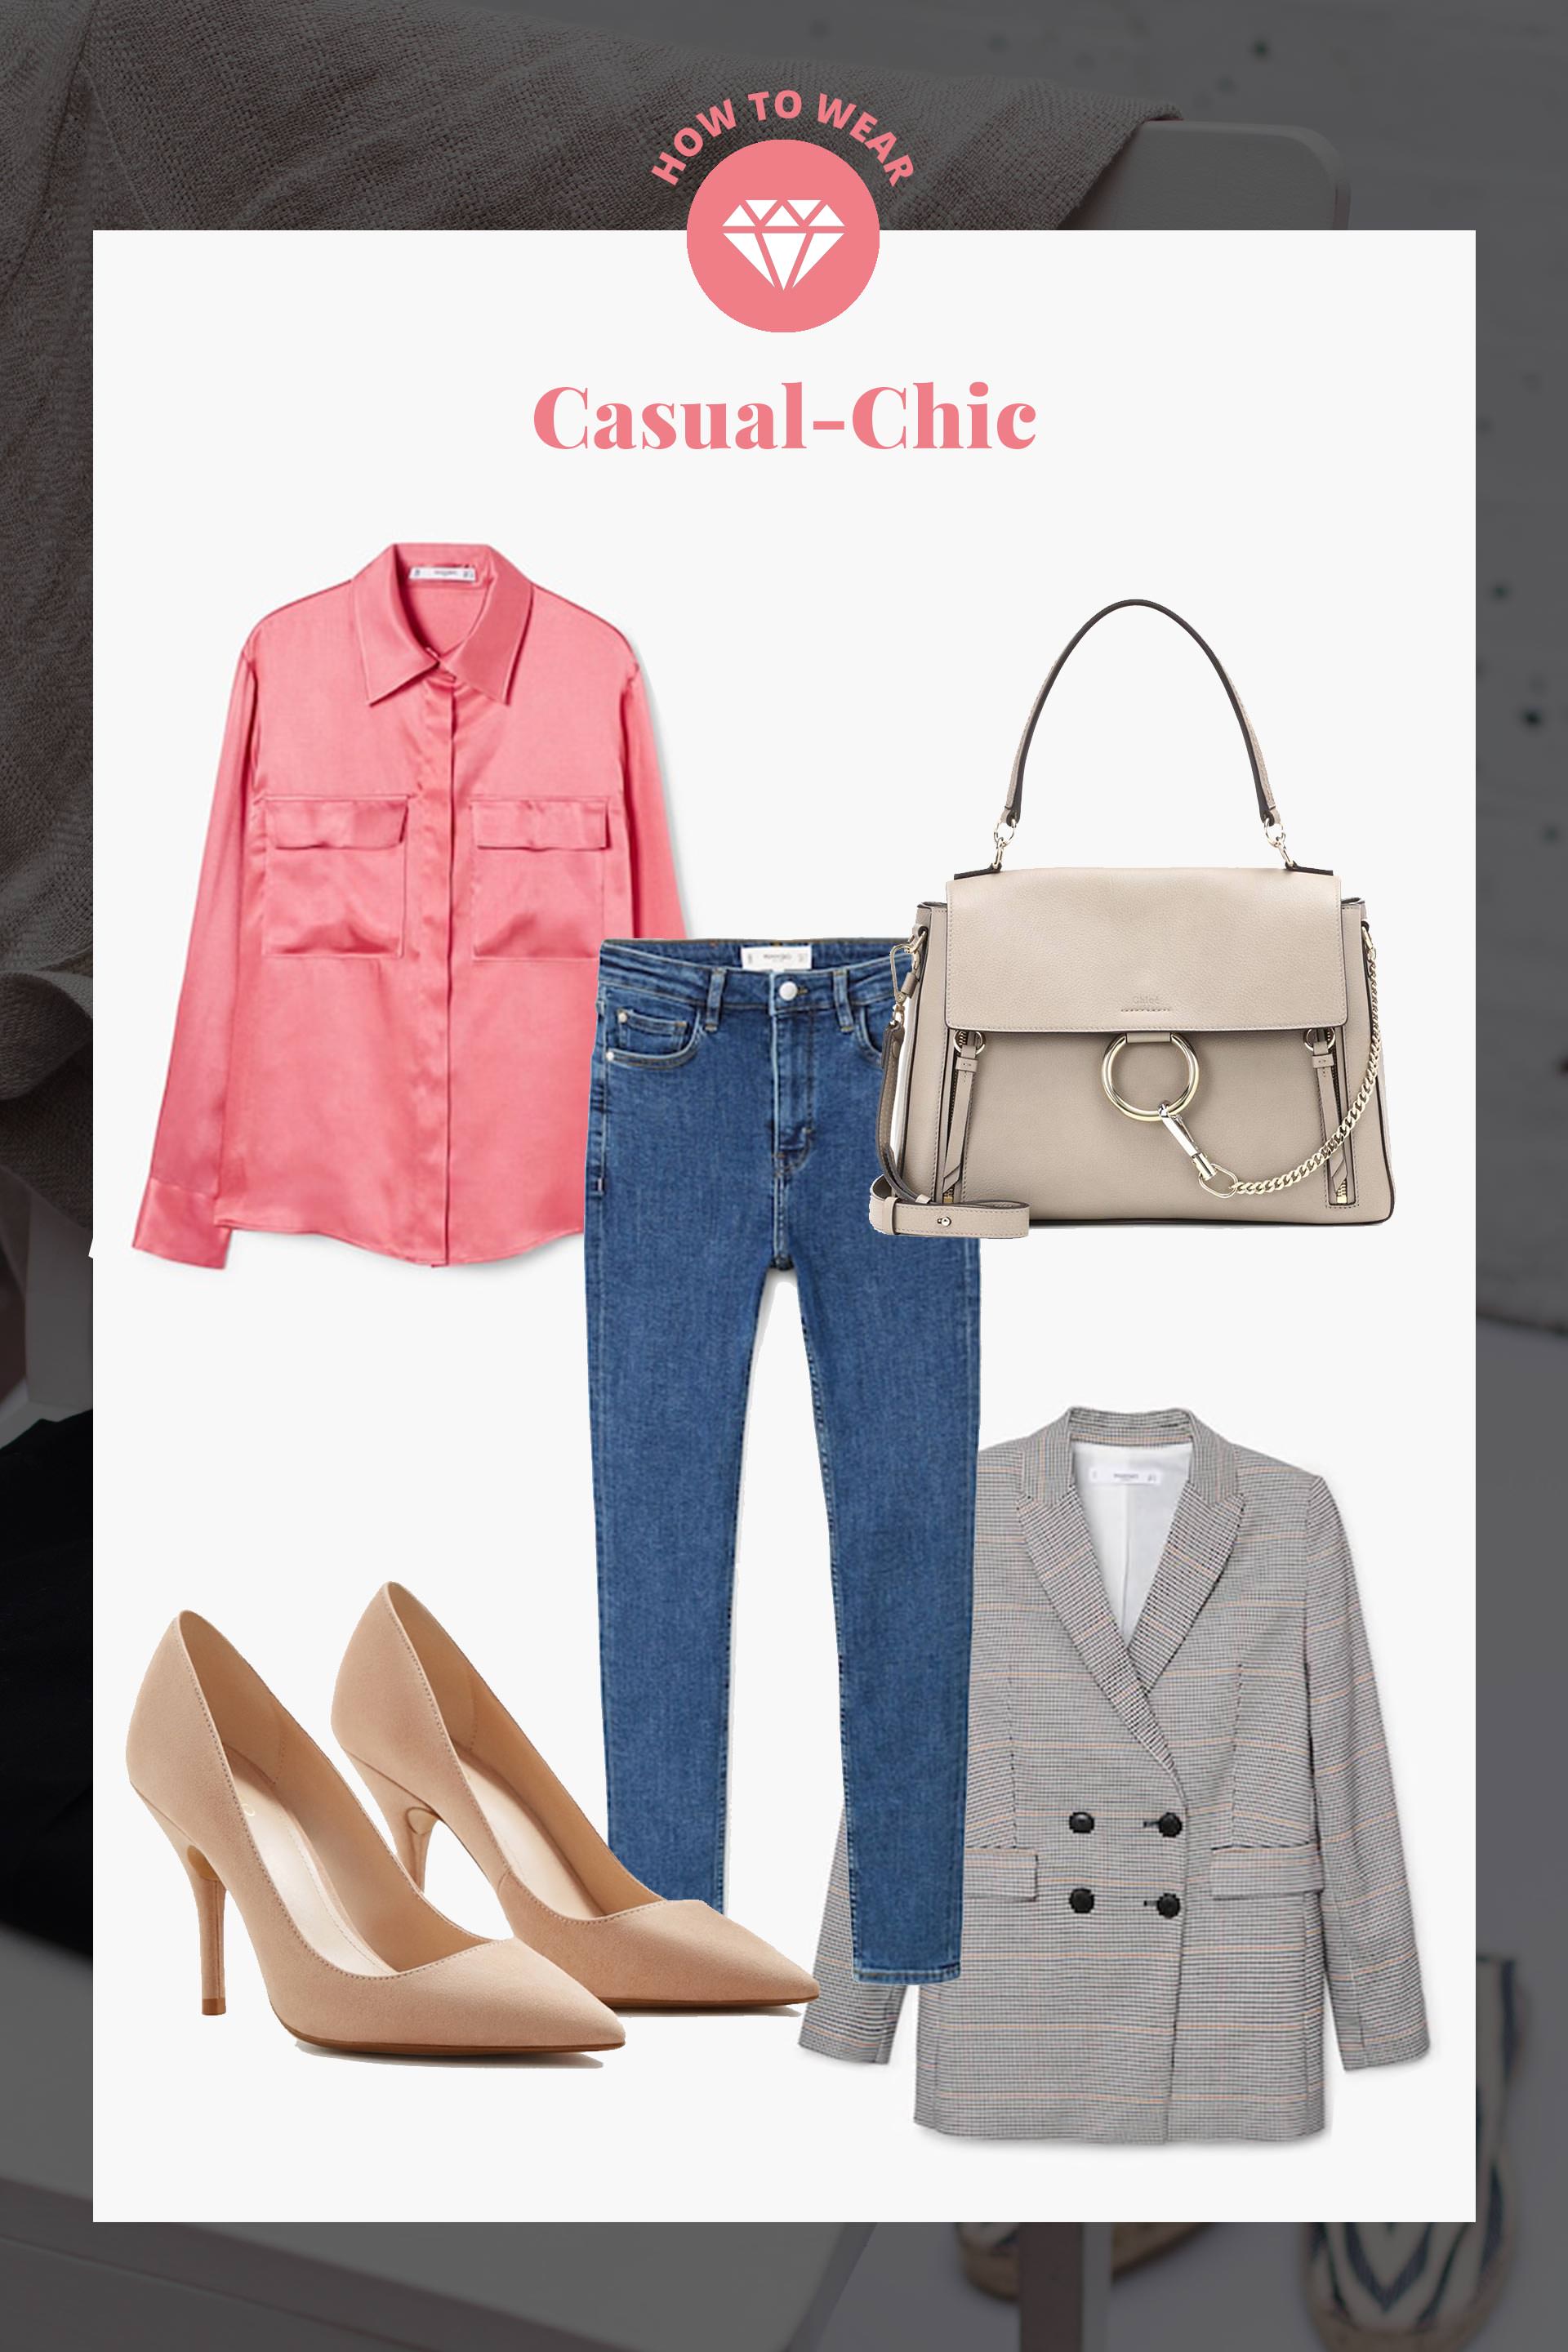 Casual-Chic